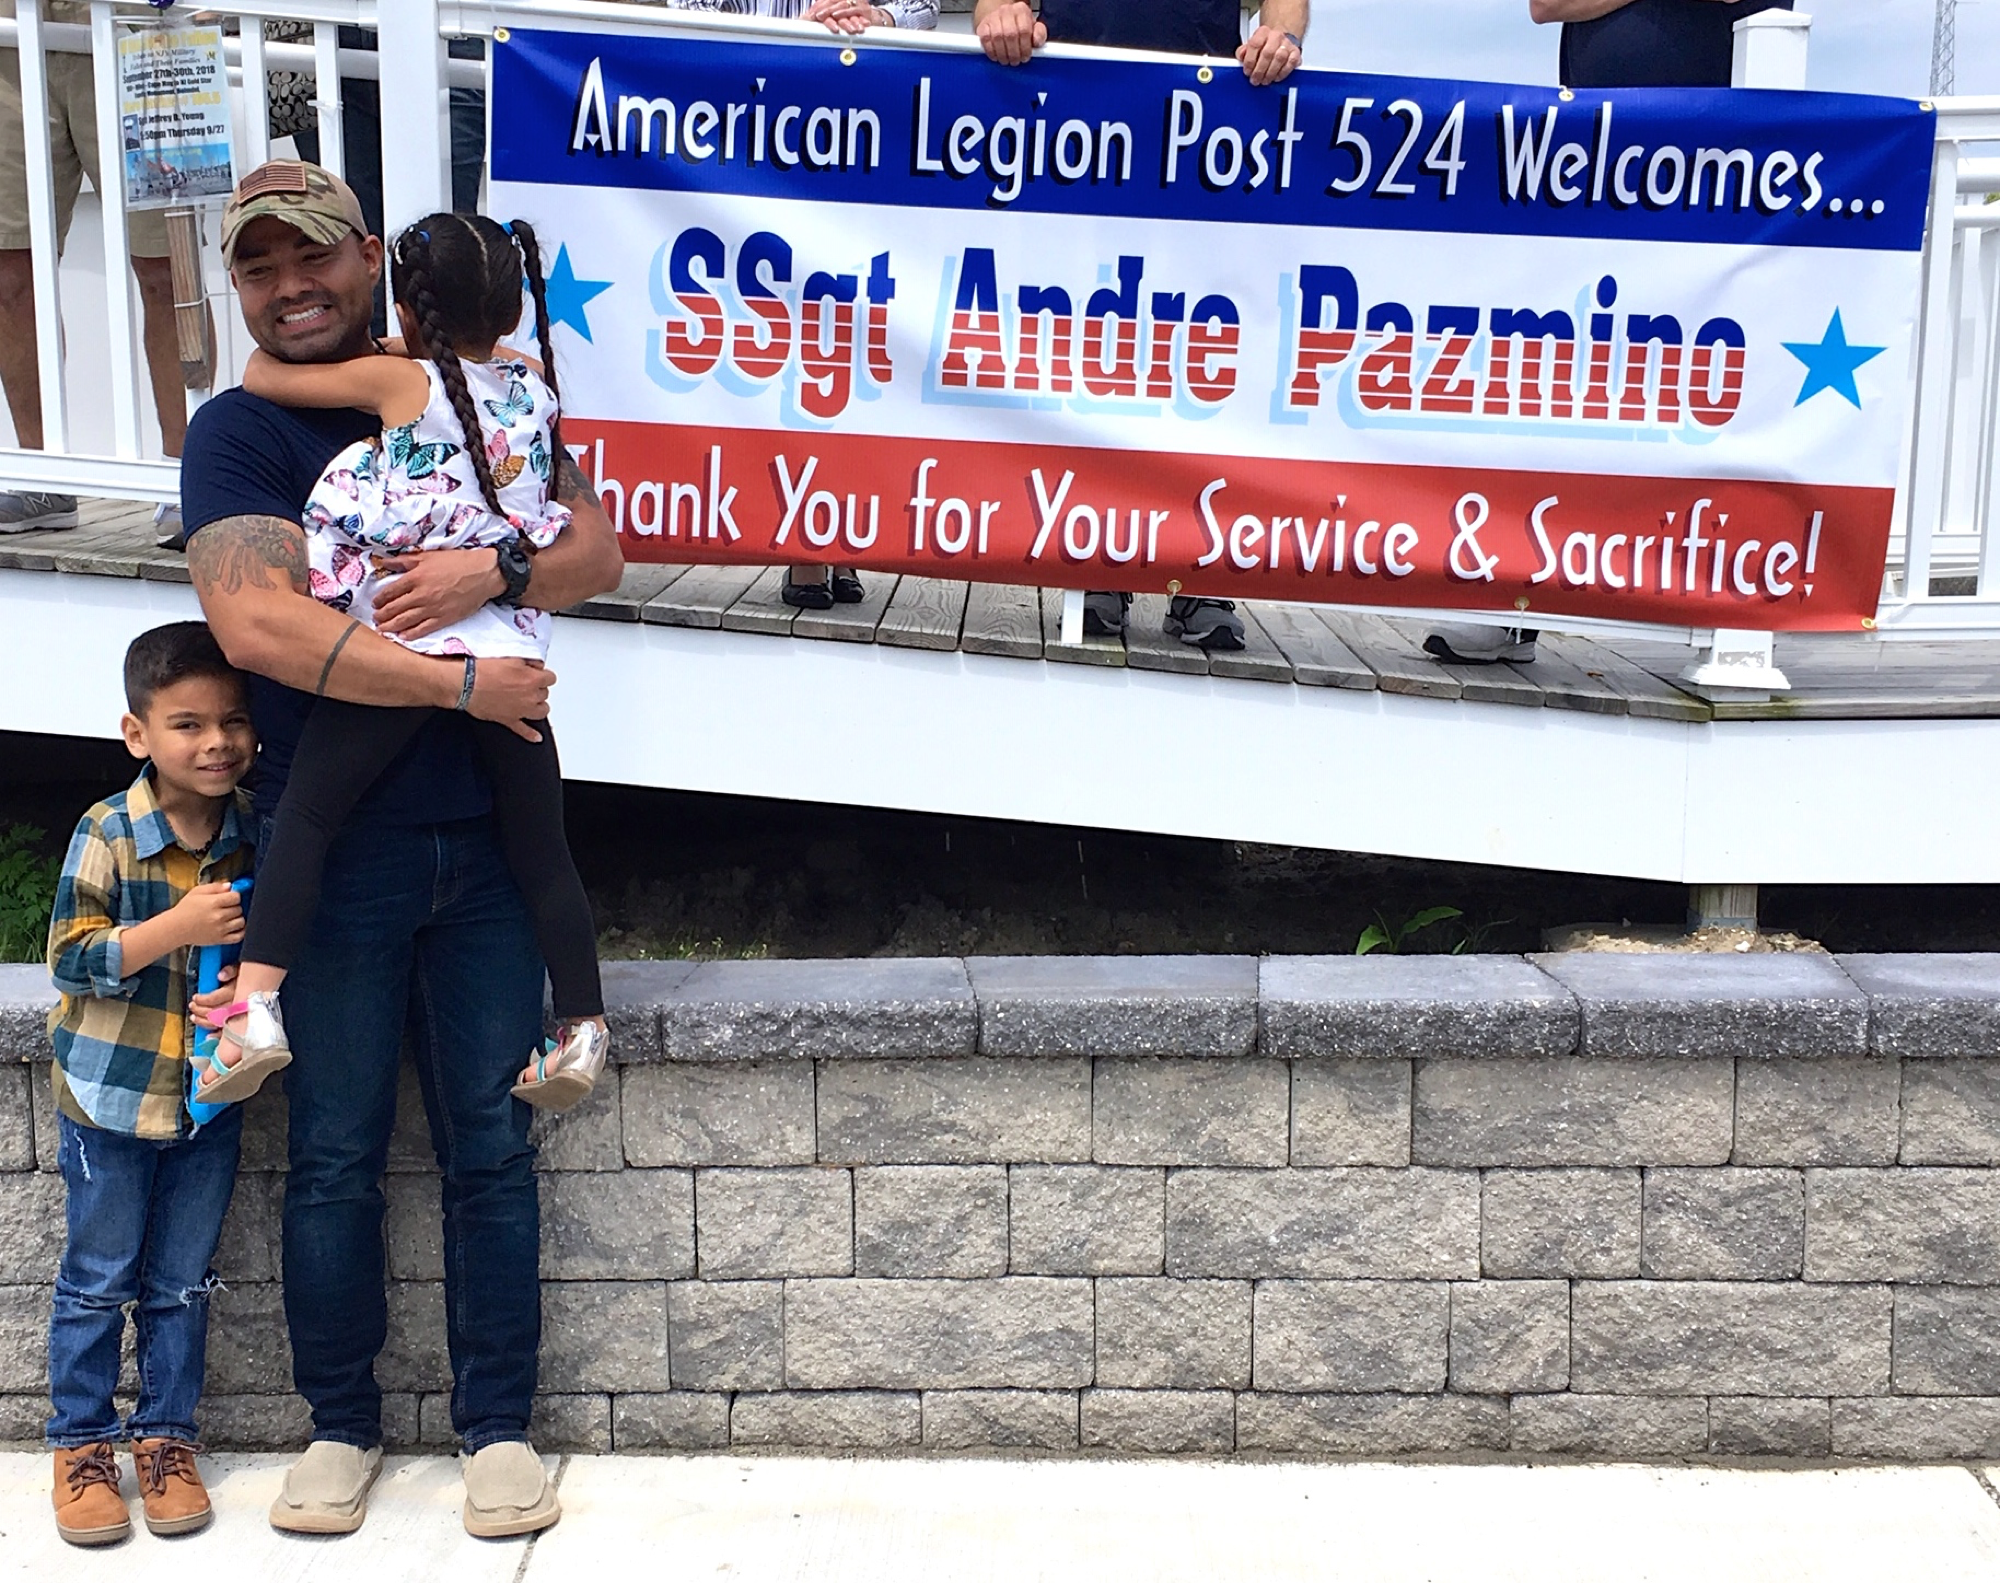 Air Force Staff Sgt. Andre Pazmino and his two children.